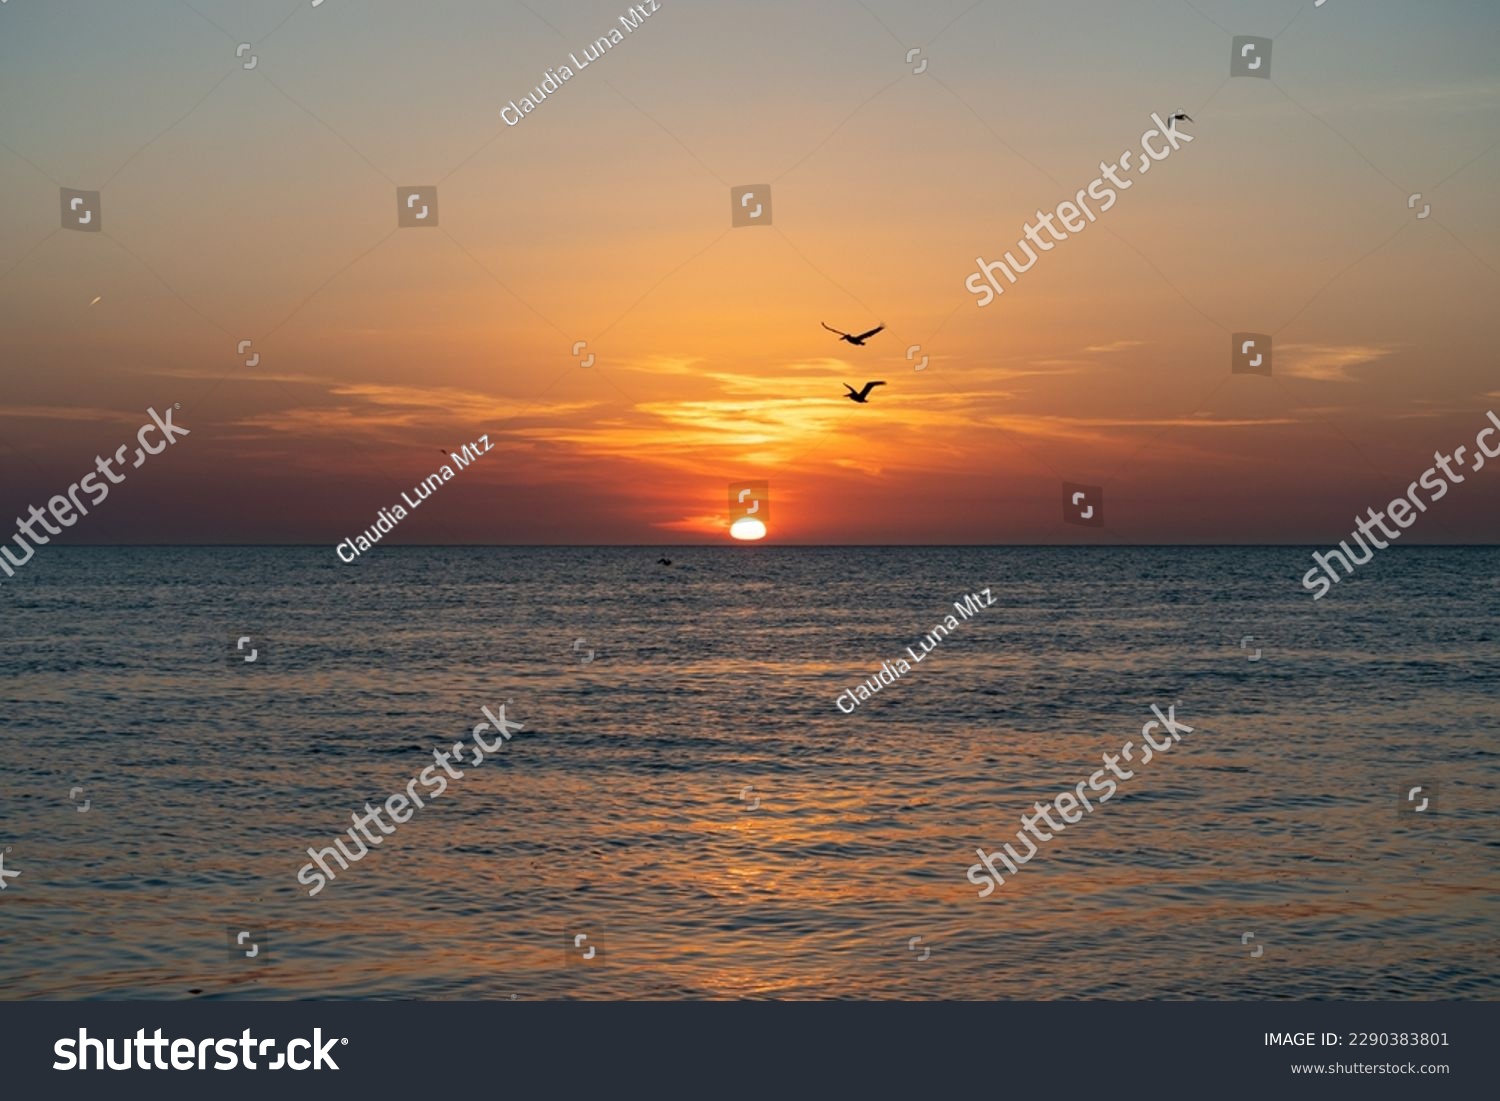 silhouettes of birds flying over the sea during sunset #2290383801